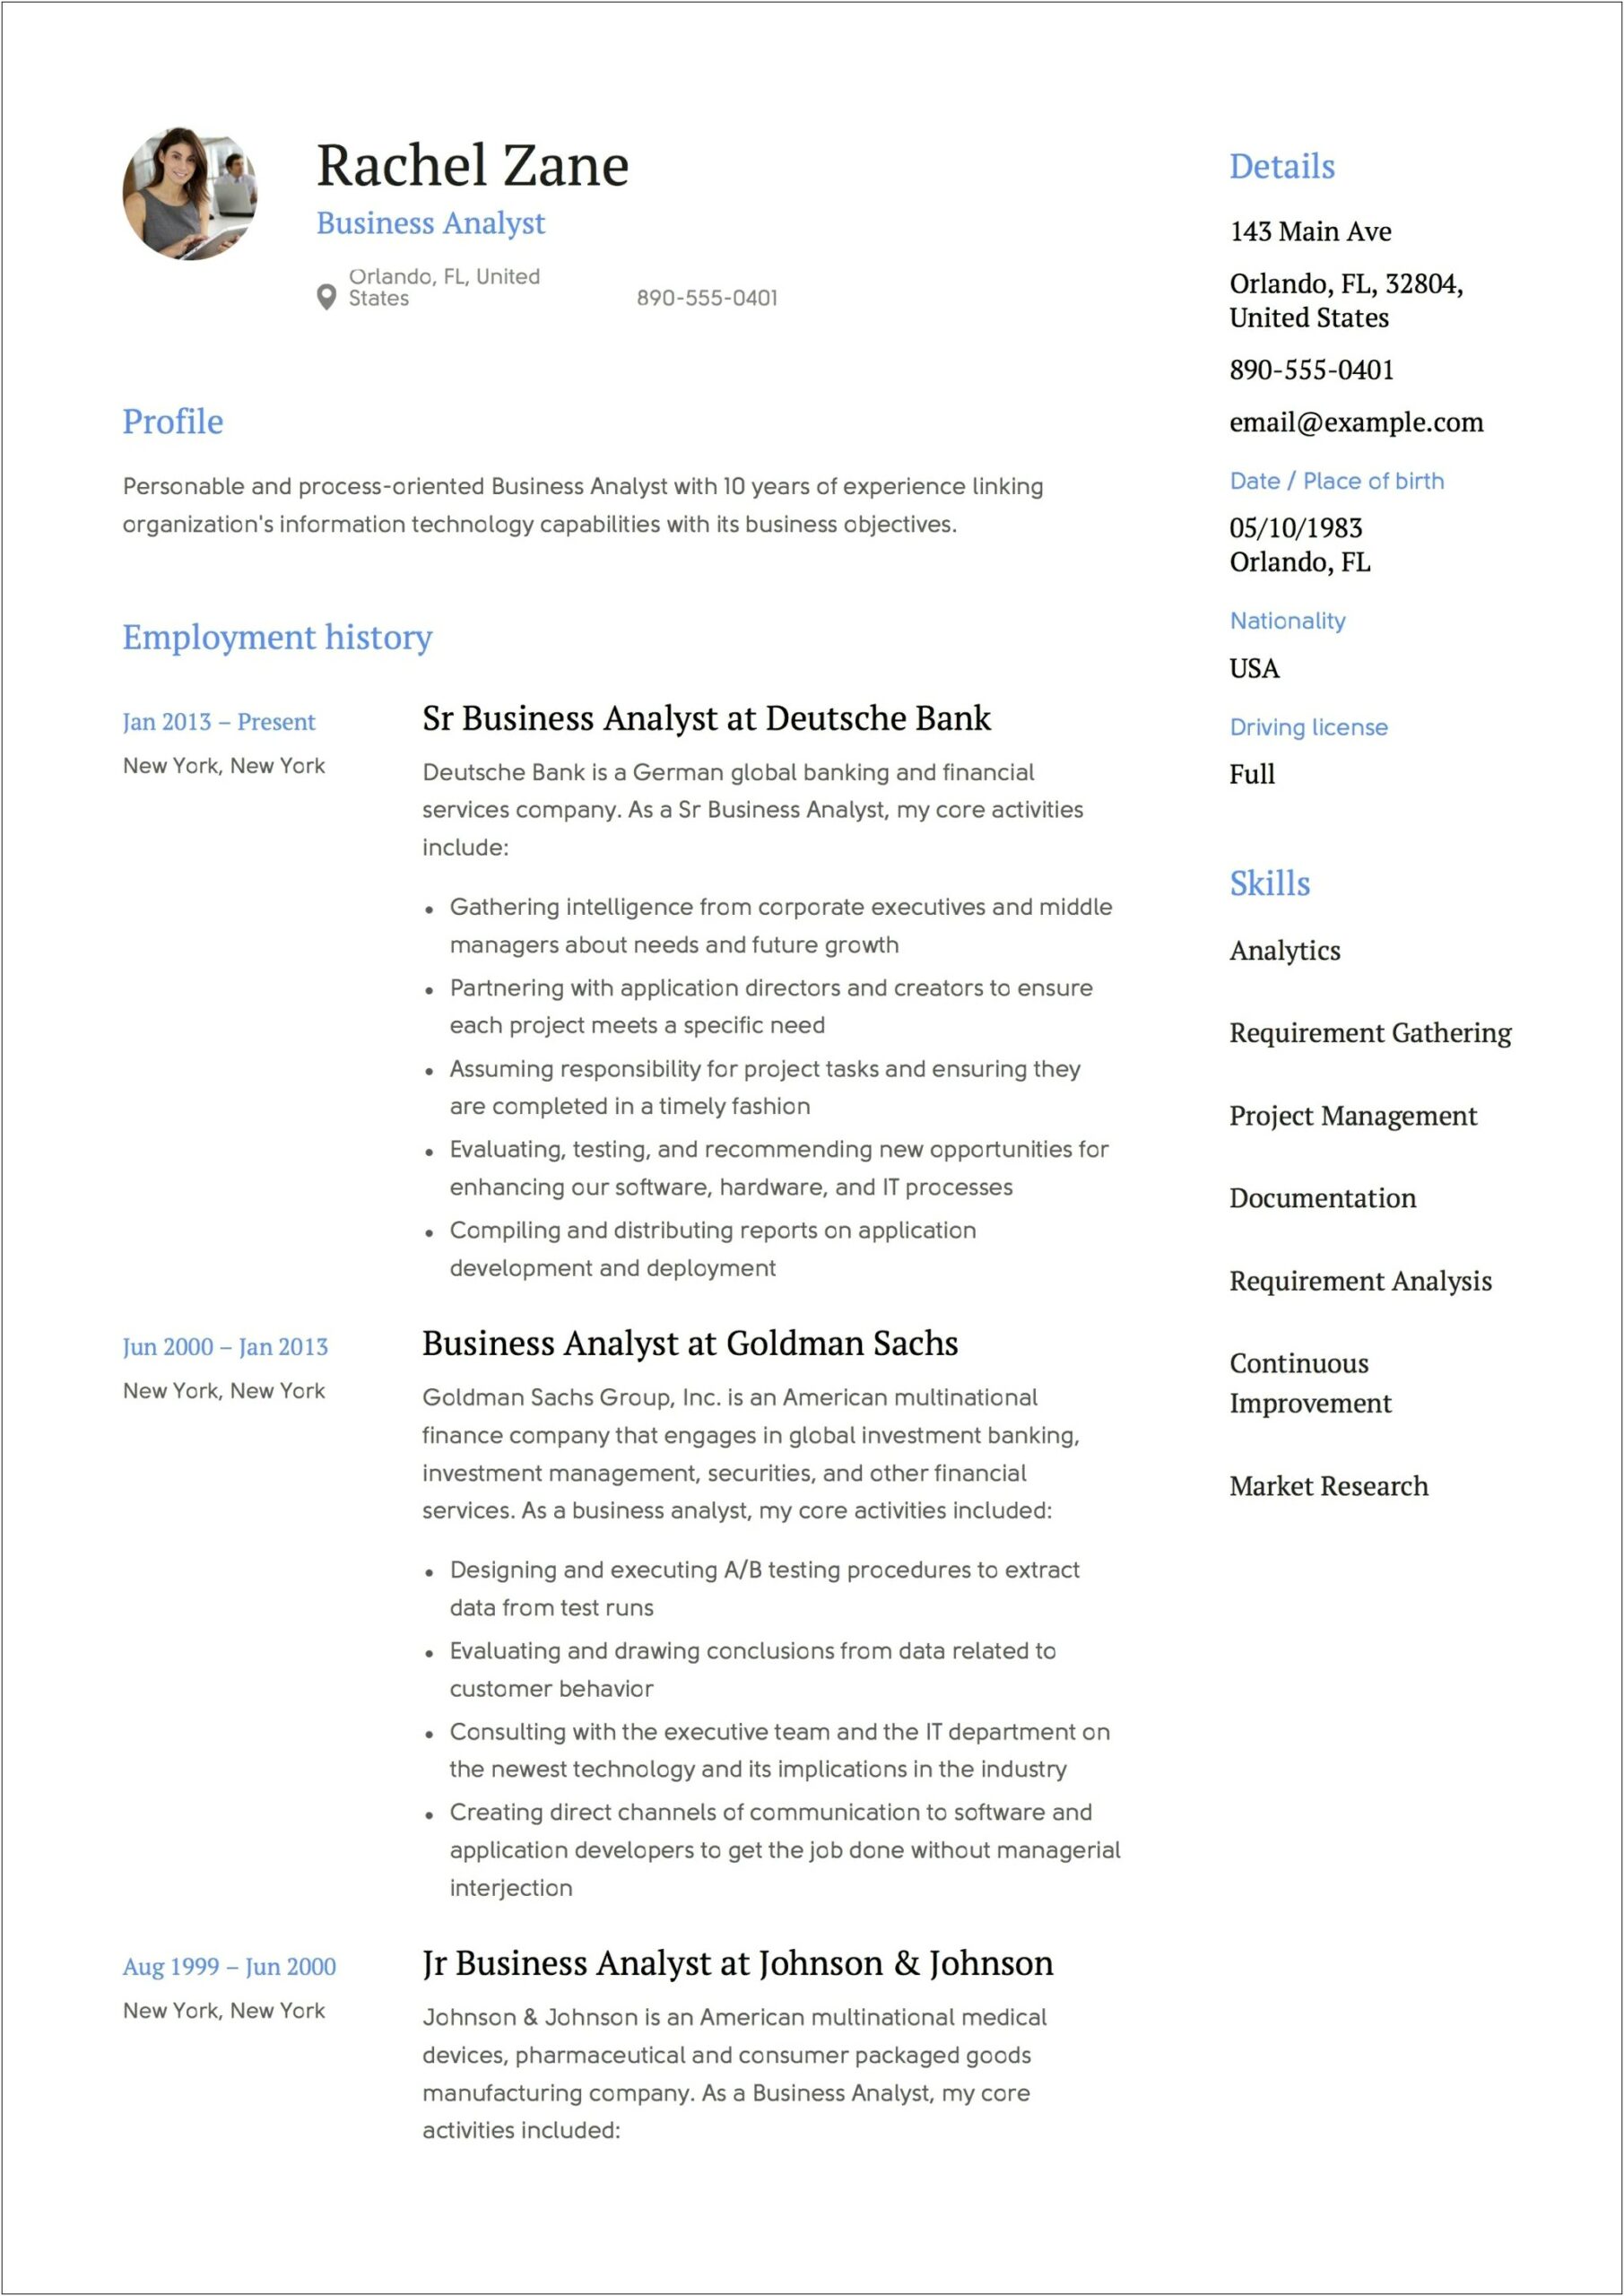 Business Analyst Resume With Scrum Experience